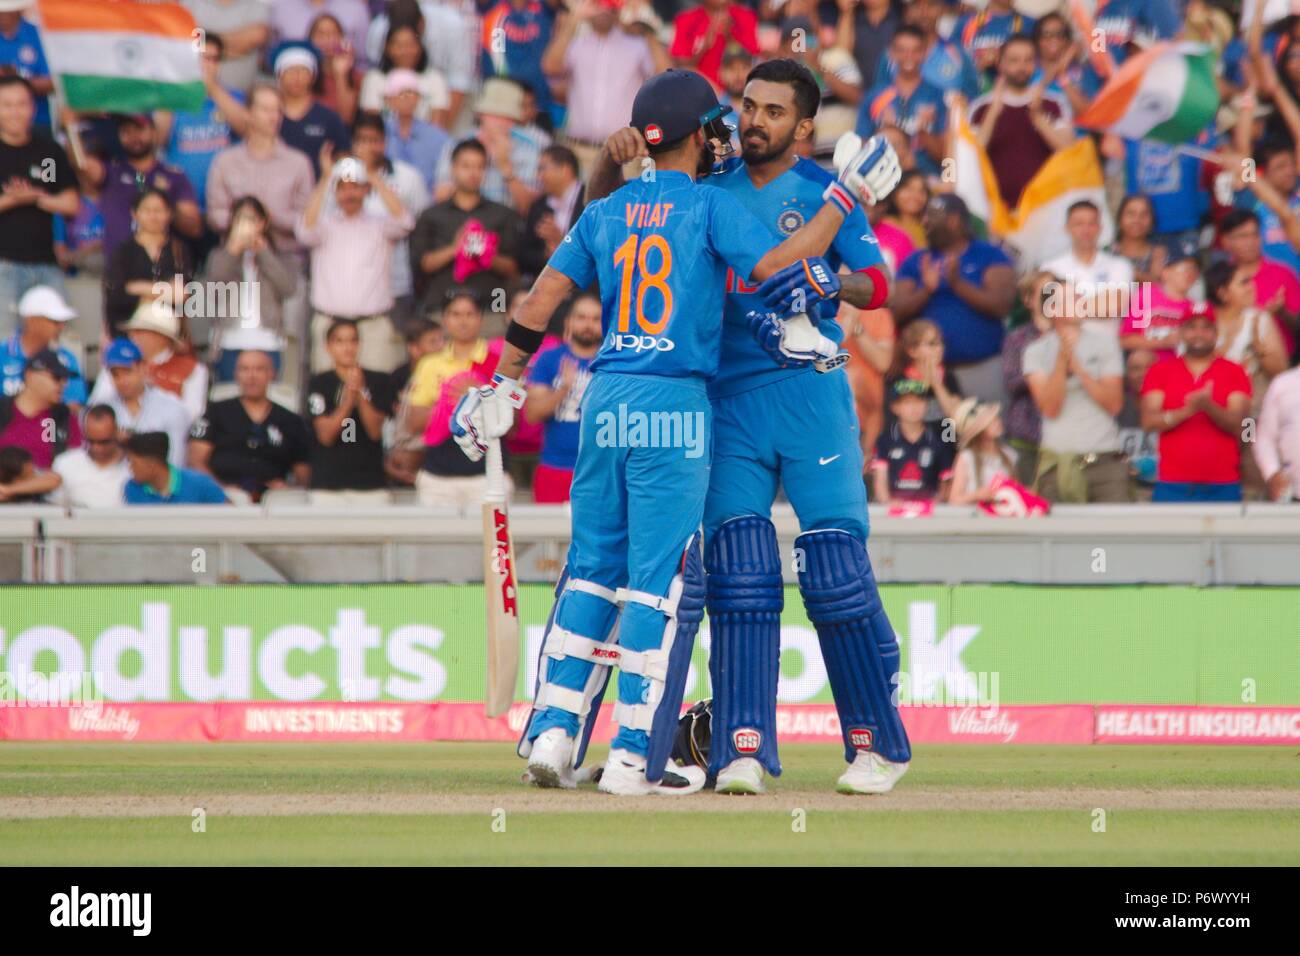 Manchester, England, 3 July 2018. Virat Kohli congratulating Lokesh Rahul on reaching his century against England in the first Vitality T20 International at Emirates Old Trafford. Credit: Colin Edwards/Alamy Live News. Stock Photo